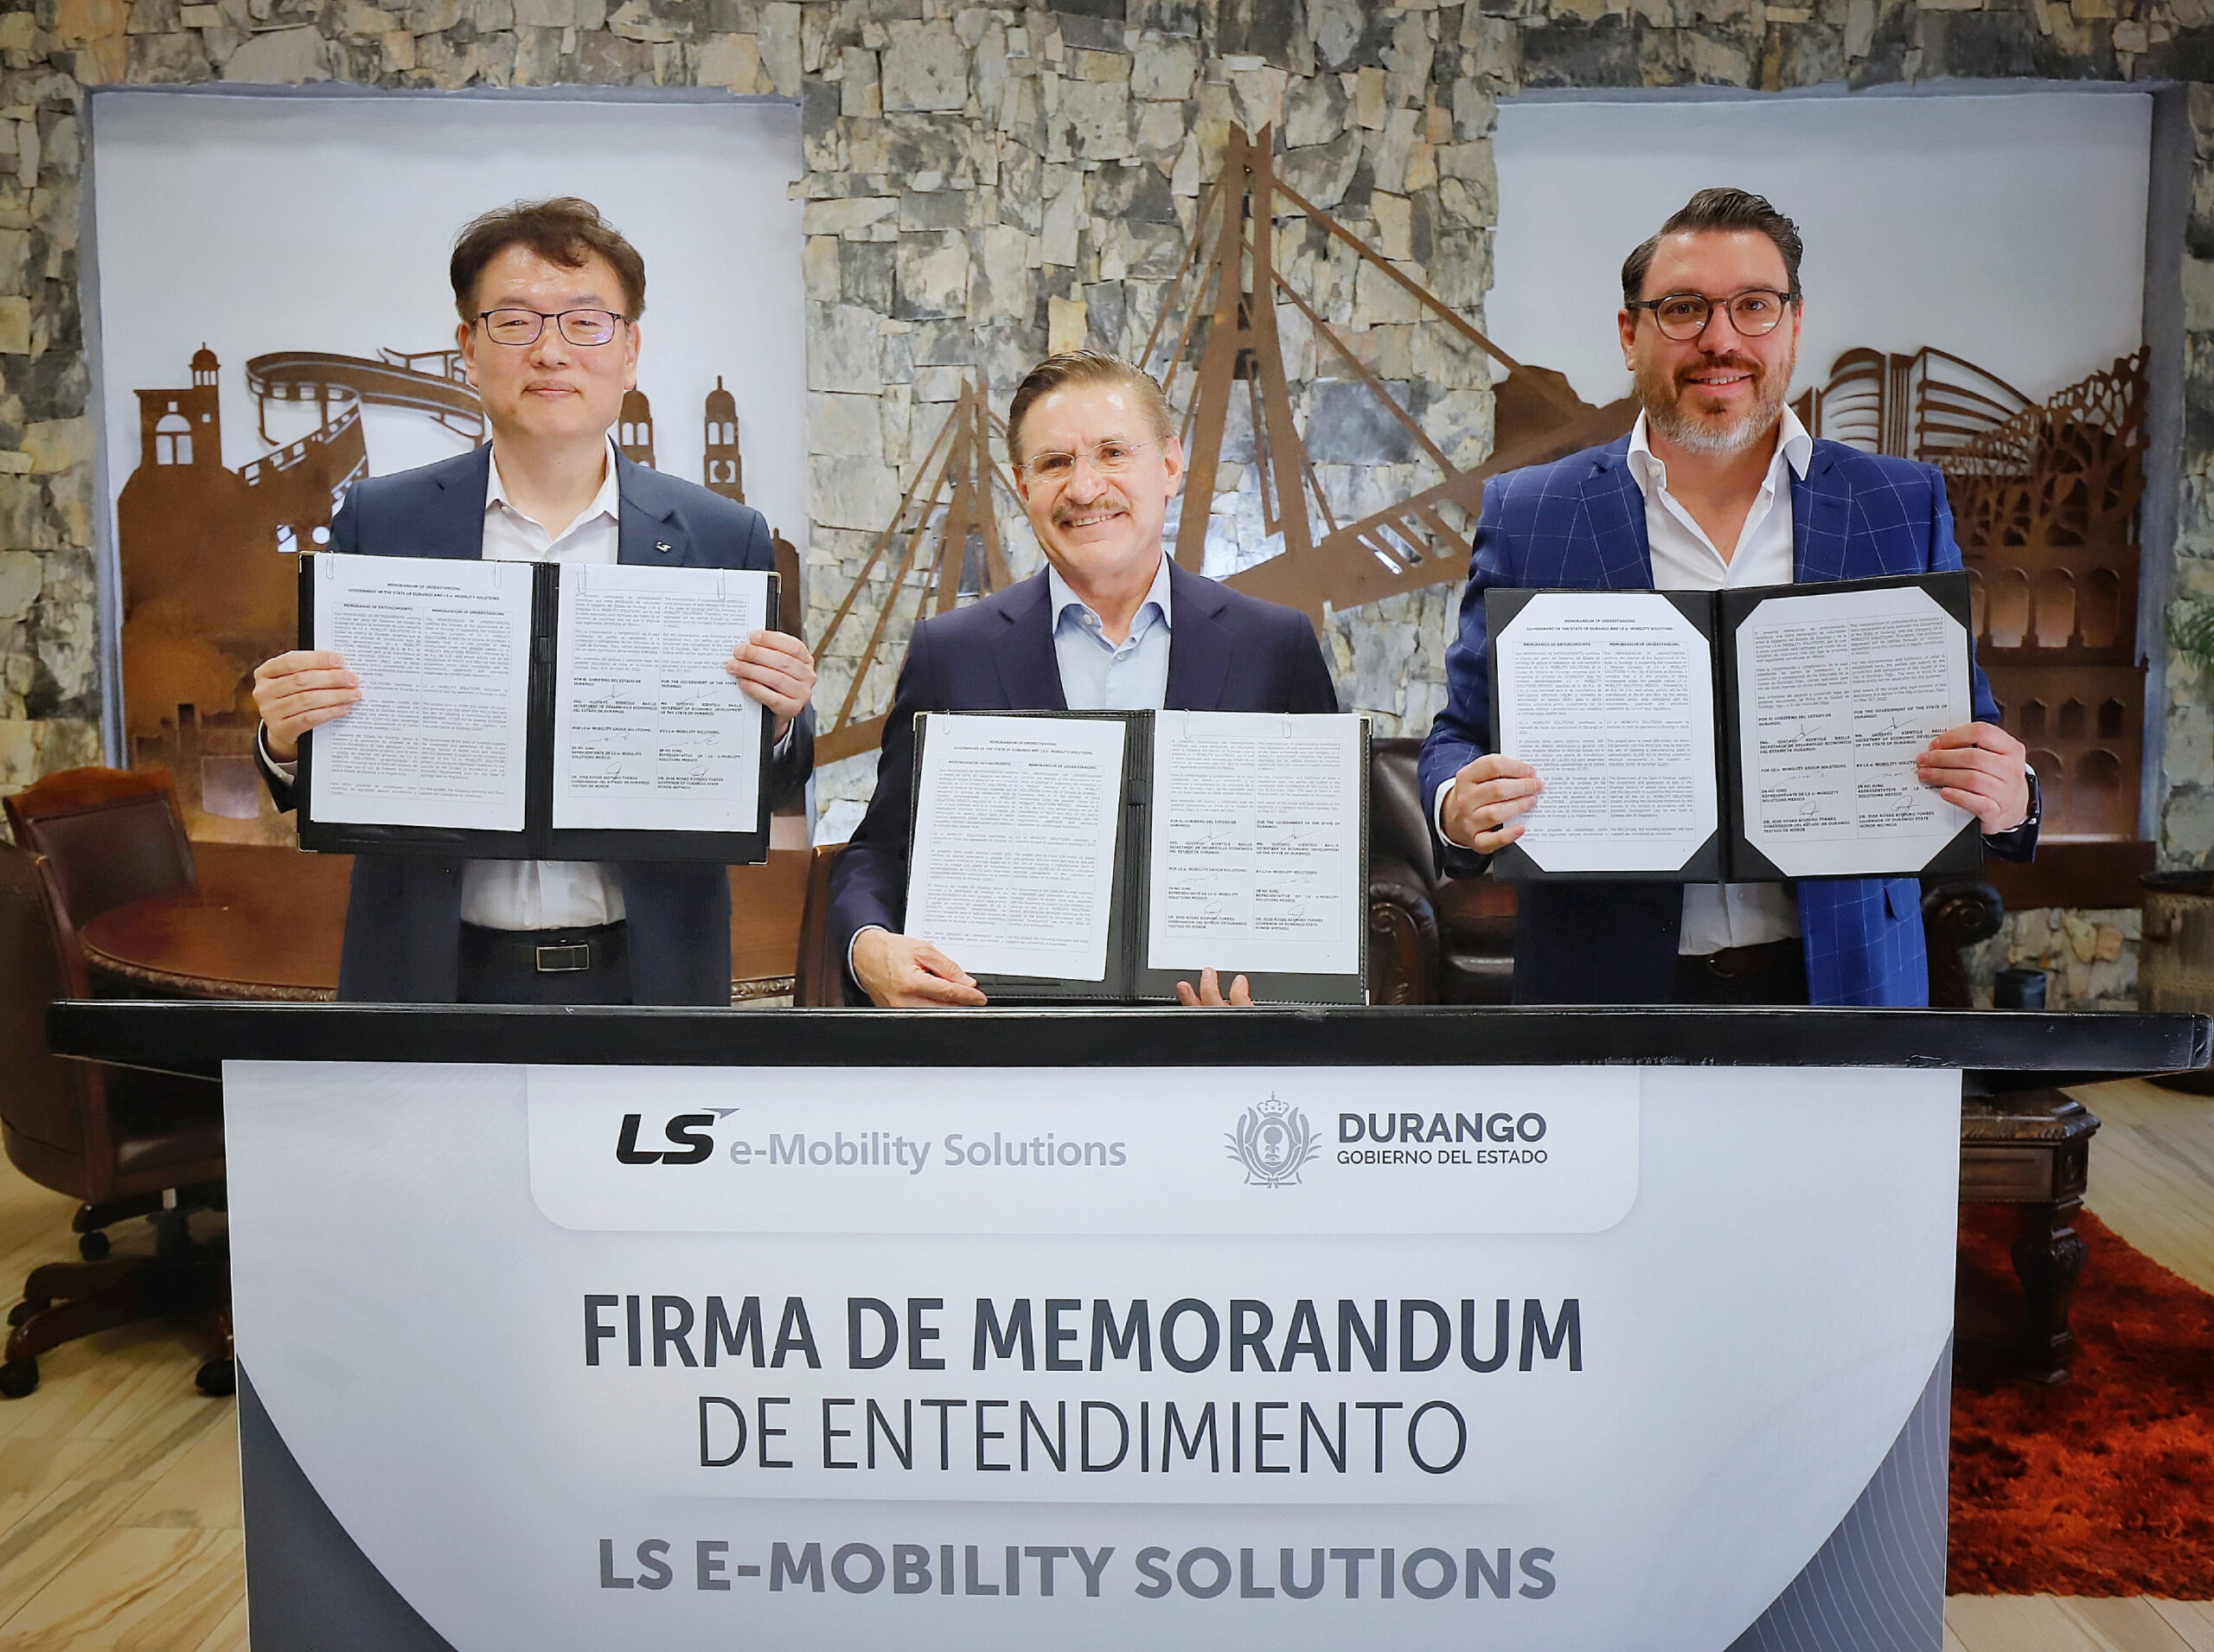 LS e-Mobility Solutions to invest US$50 million in Durango